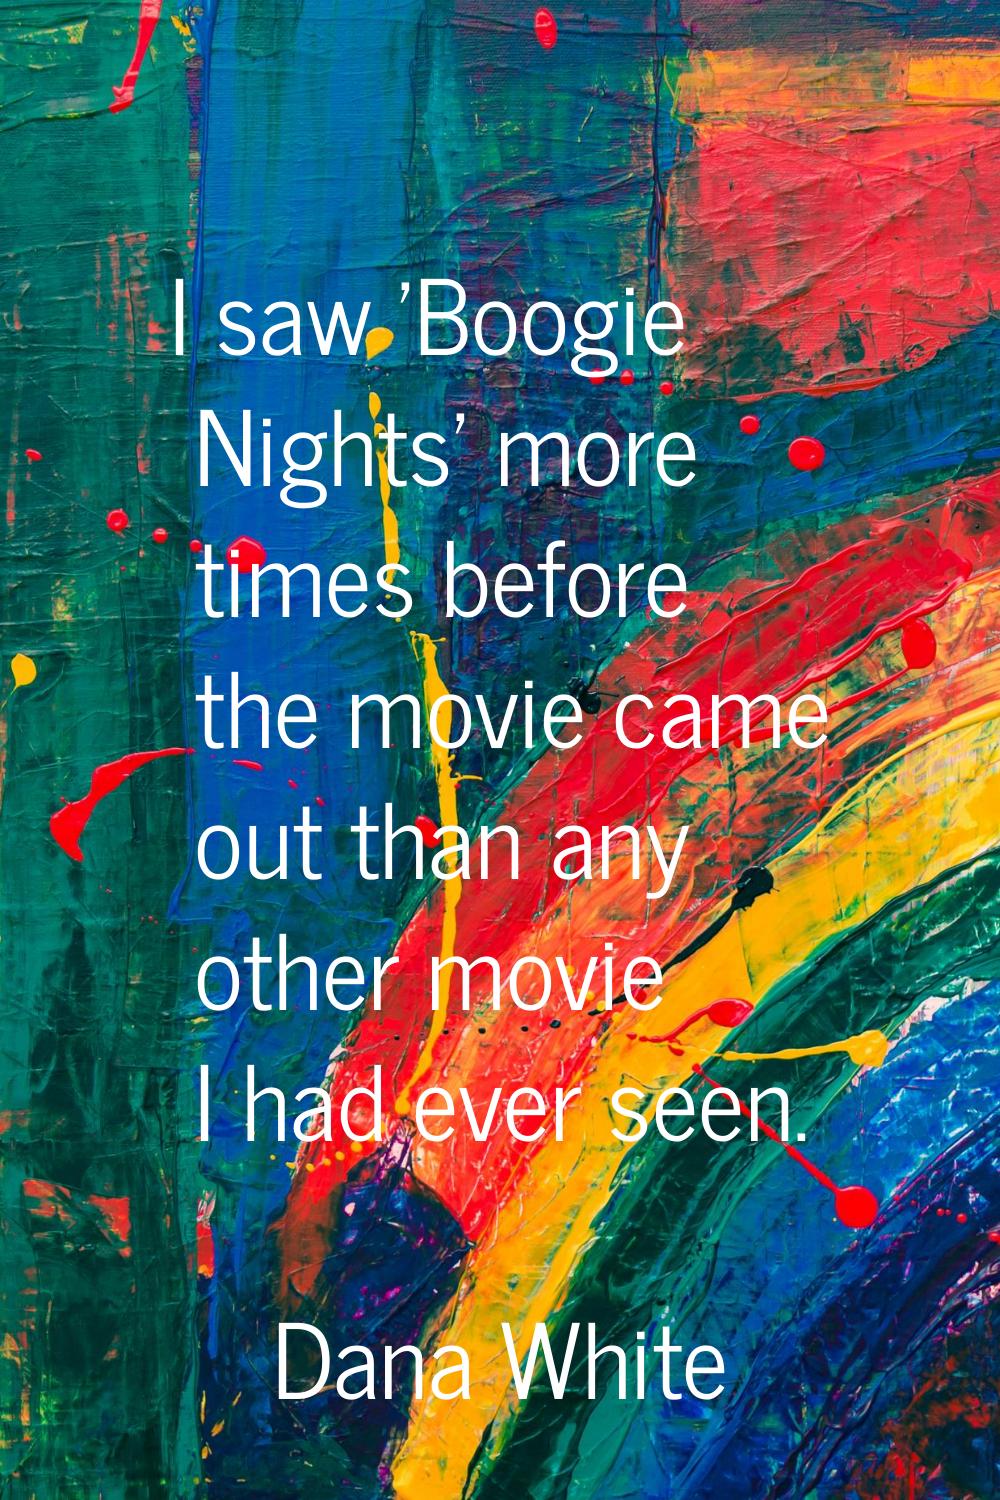 I saw 'Boogie Nights' more times before the movie came out than any other movie I had ever seen.